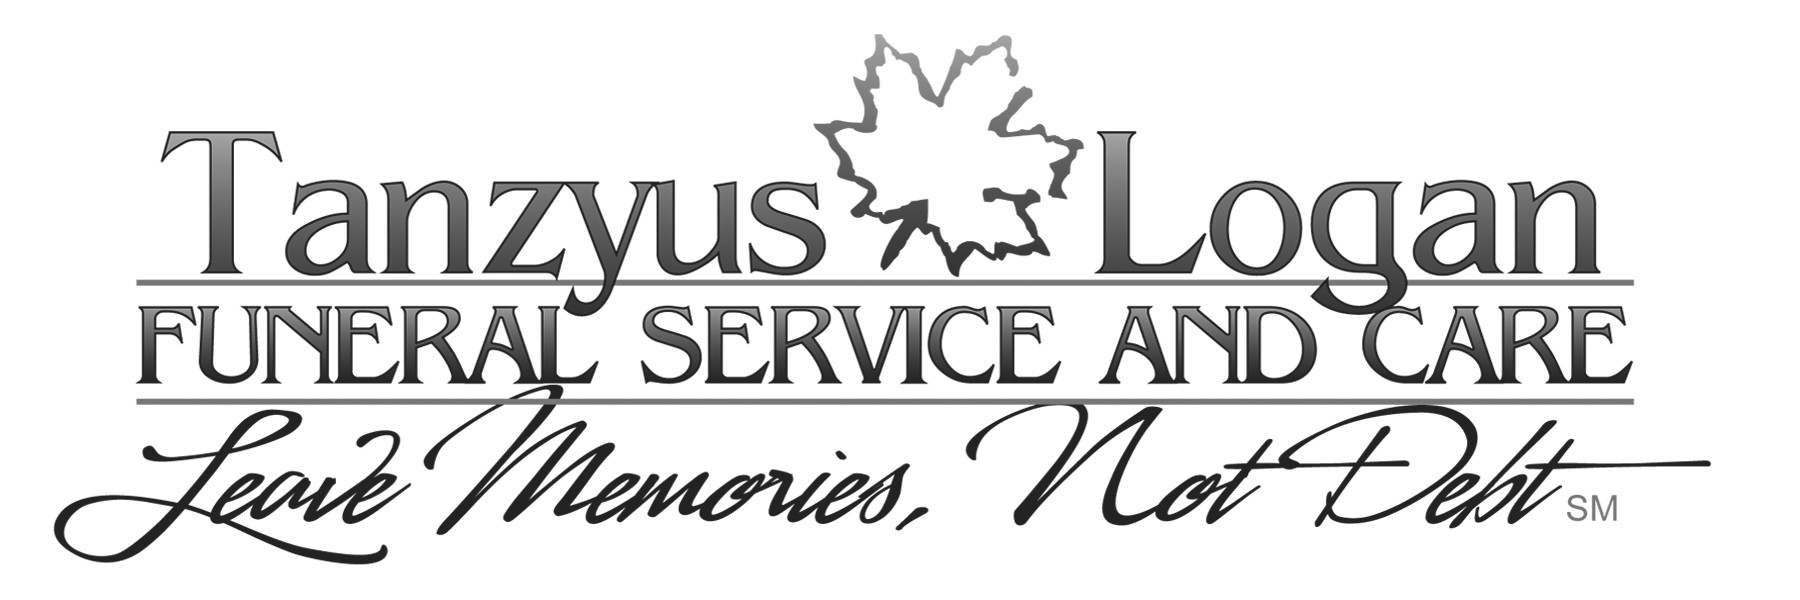 Tanzyus Logan Funeral Service And Care Decatur (217)233-1080